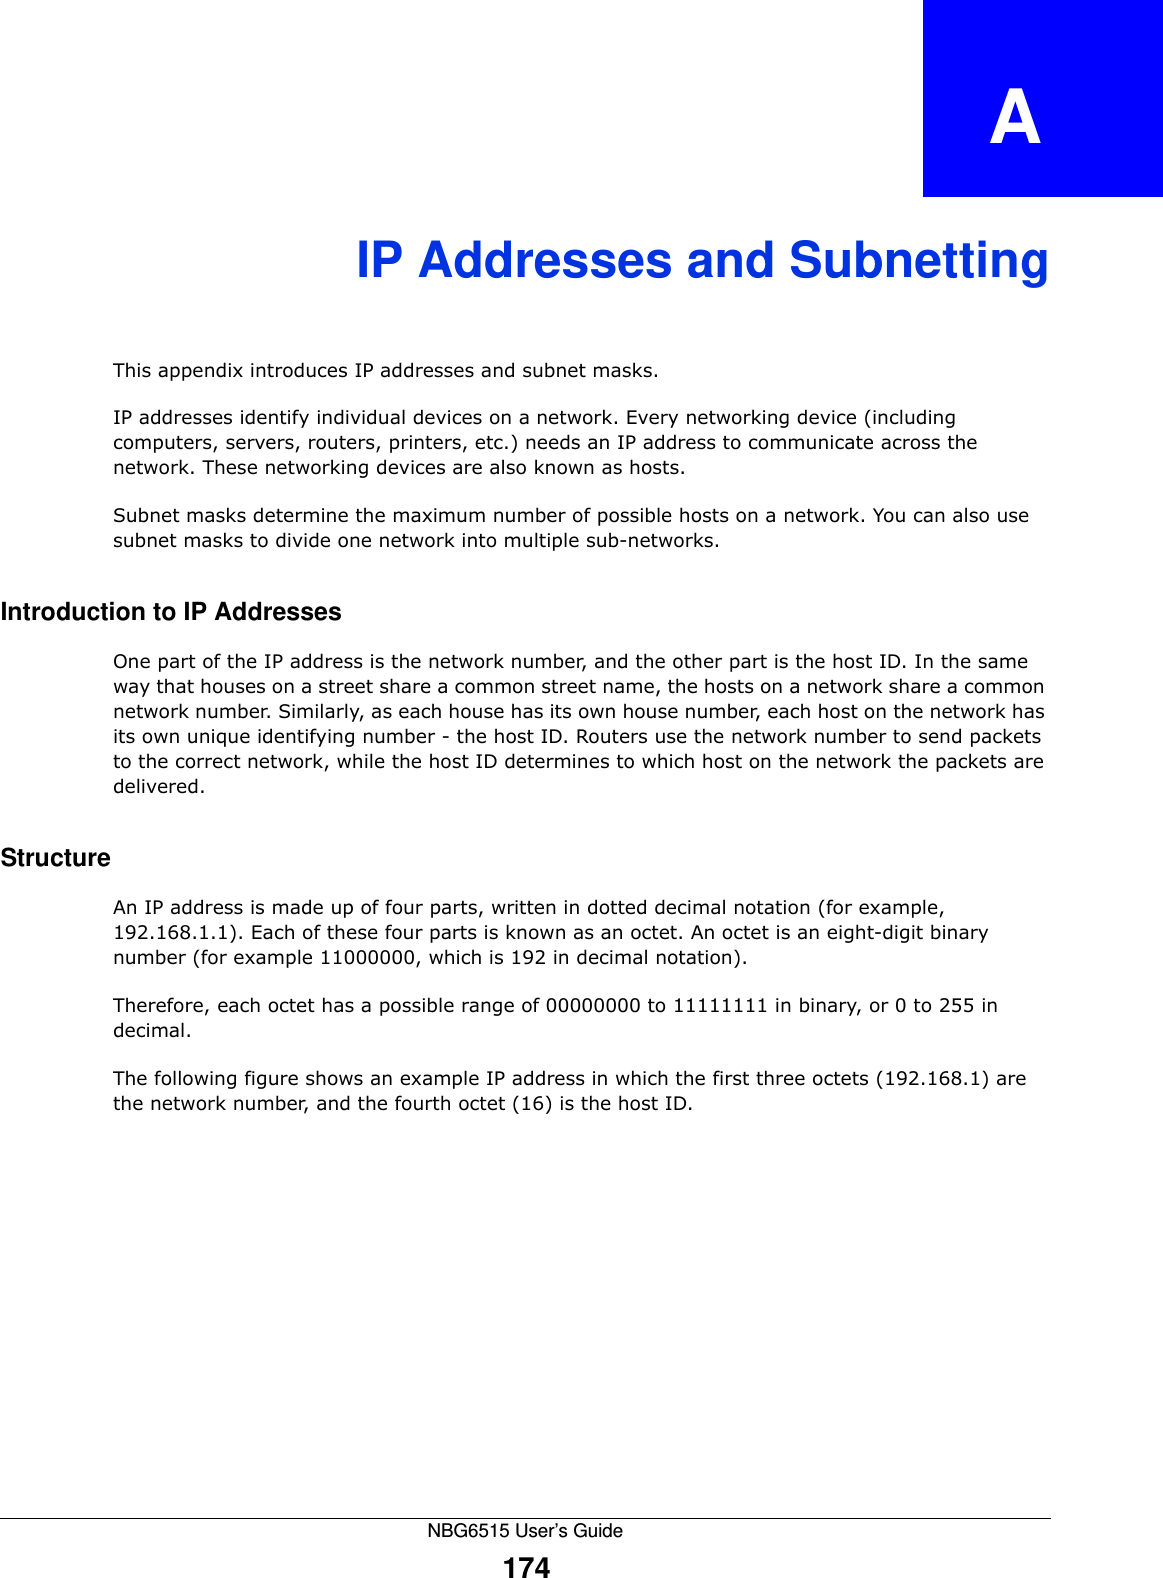 NBG6515 User’s Guide174APPENDIX   AIP Addresses and SubnettingThis appendix introduces IP addresses and subnet masks. IP addresses identify individual devices on a network. Every networking device (including computers, servers, routers, printers, etc.) needs an IP address to communicate across the network. These networking devices are also known as hosts.Subnet masks determine the maximum number of possible hosts on a network. You can also use subnet masks to divide one network into multiple sub-networks.Introduction to IP AddressesOne part of the IP address is the network number, and the other part is the host ID. In the same way that houses on a street share a common street name, the hosts on a network share a common network number. Similarly, as each house has its own house number, each host on the network has its own unique identifying number - the host ID. Routers use the network number to send packets to the correct network, while the host ID determines to which host on the network the packets are delivered.StructureAn IP address is made up of four parts, written in dotted decimal notation (for example, 192.168.1.1). Each of these four parts is known as an octet. An octet is an eight-digit binary number (for example 11000000, which is 192 in decimal notation). Therefore, each octet has a possible range of 00000000 to 11111111 in binary, or 0 to 255 in decimal.The following figure shows an example IP address in which the first three octets (192.168.1) are the network number, and the fourth octet (16) is the host ID.